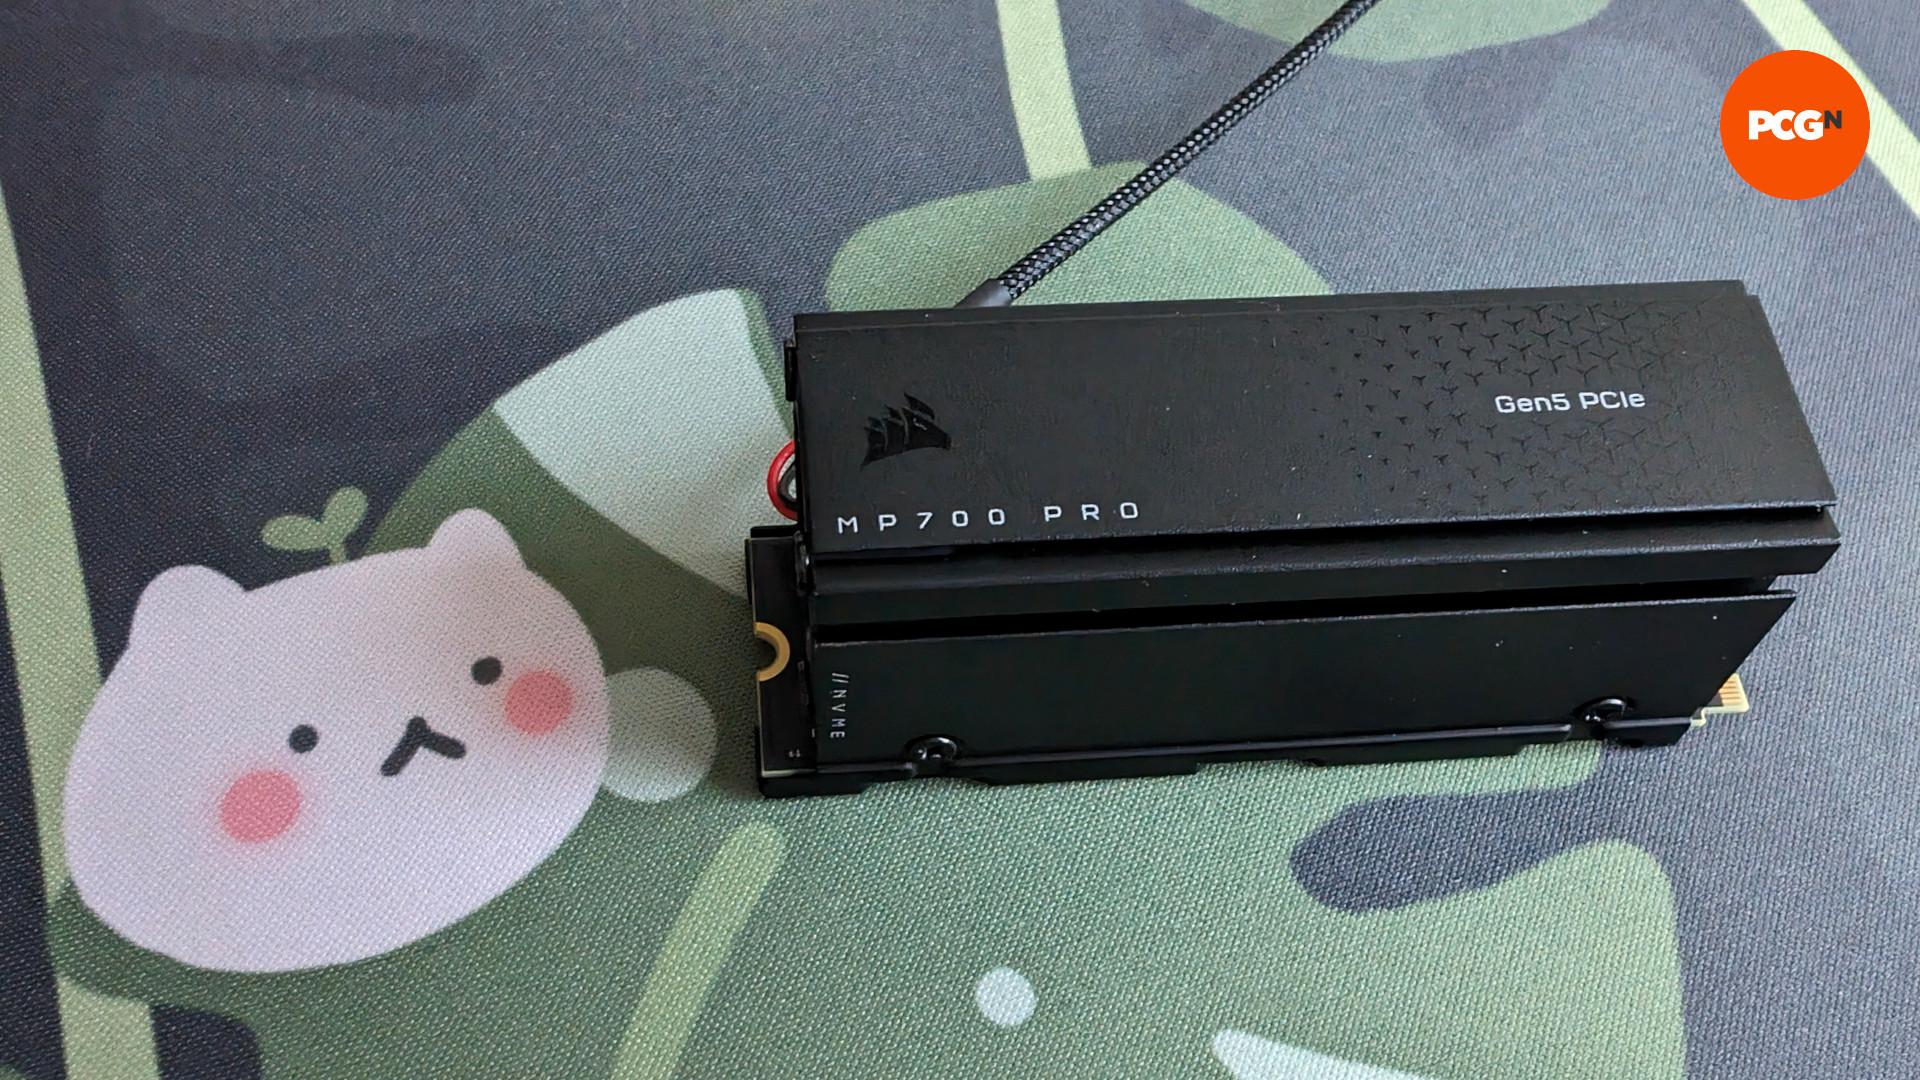 The Corsair MP700 Pro against a leafy background, featuring a small white cat-like character (left)